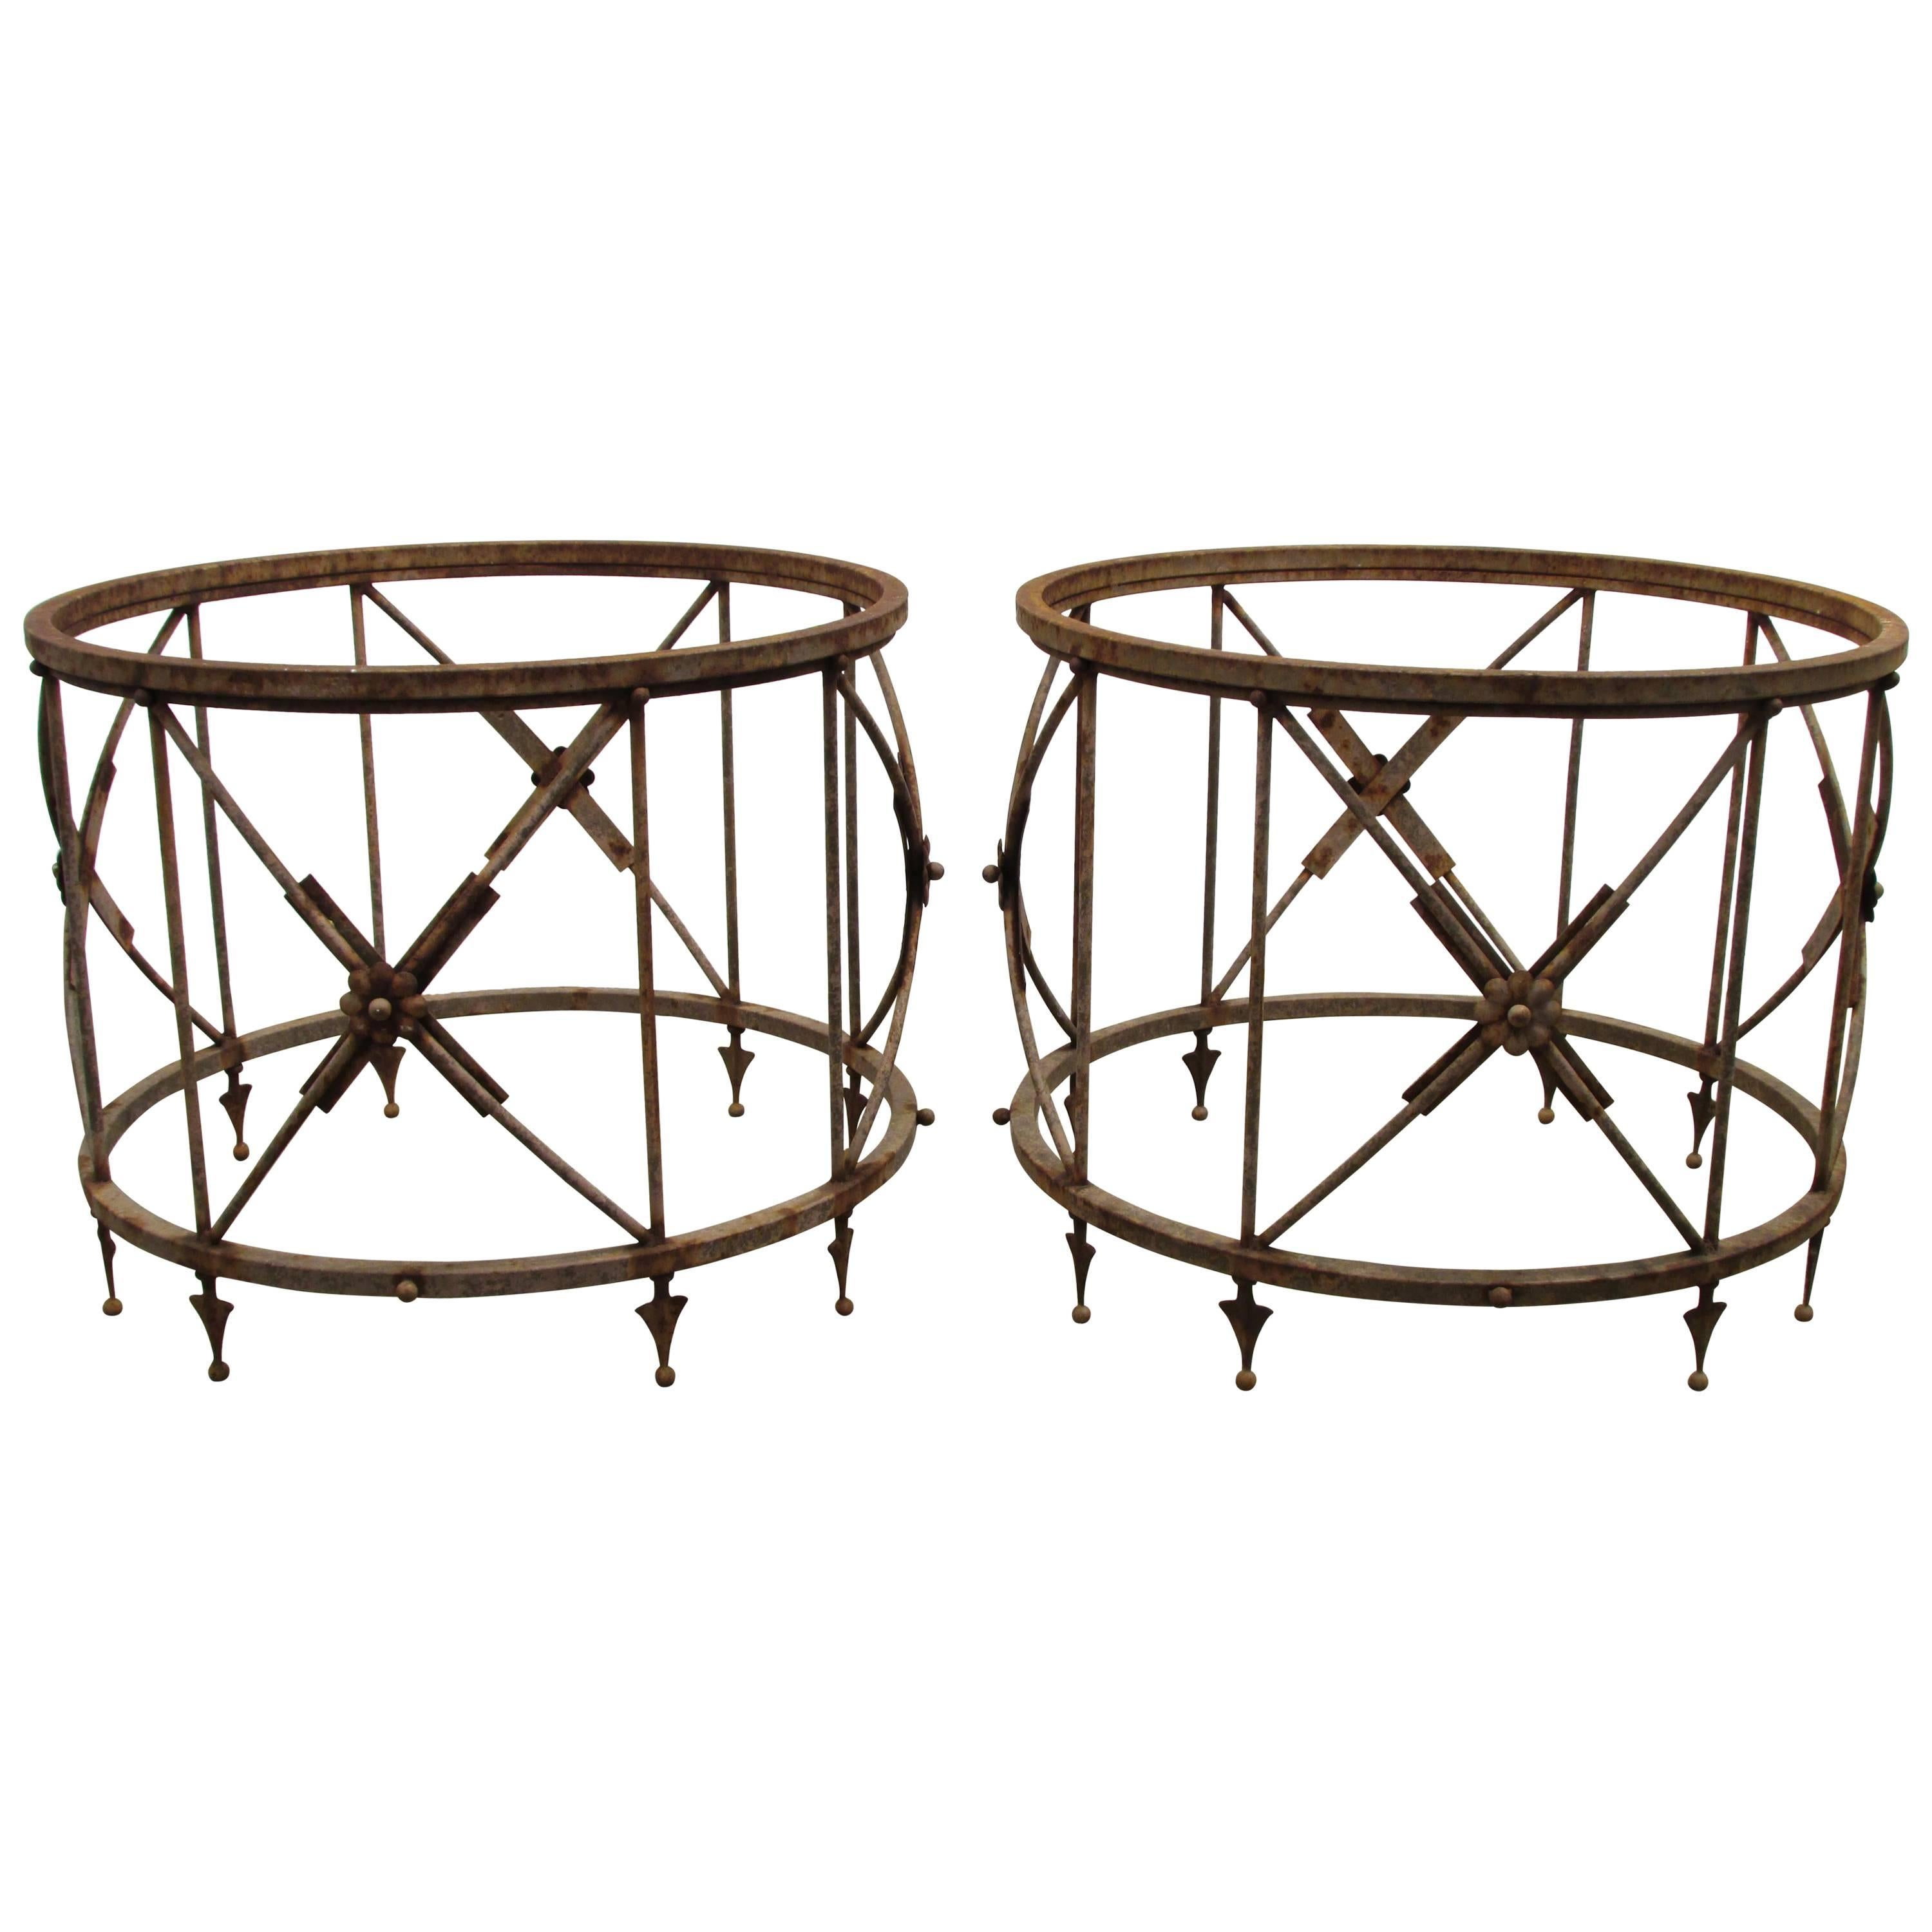 Pair of Round Neoclassical Garden Tables For Sale